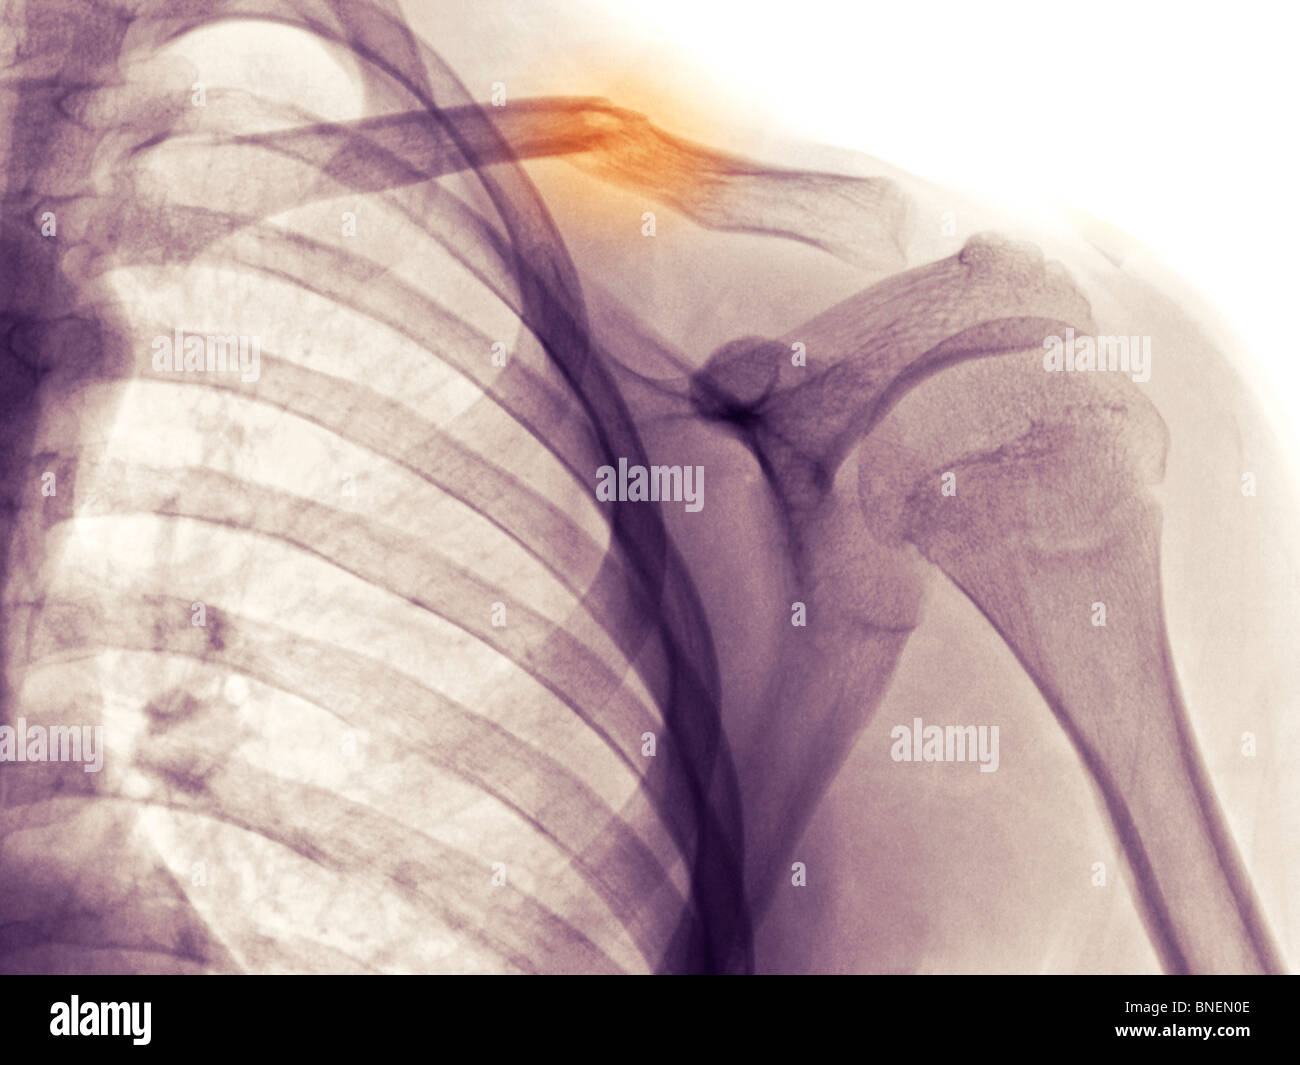 shoulder x-ray showing fractured clavicle Stock Photo